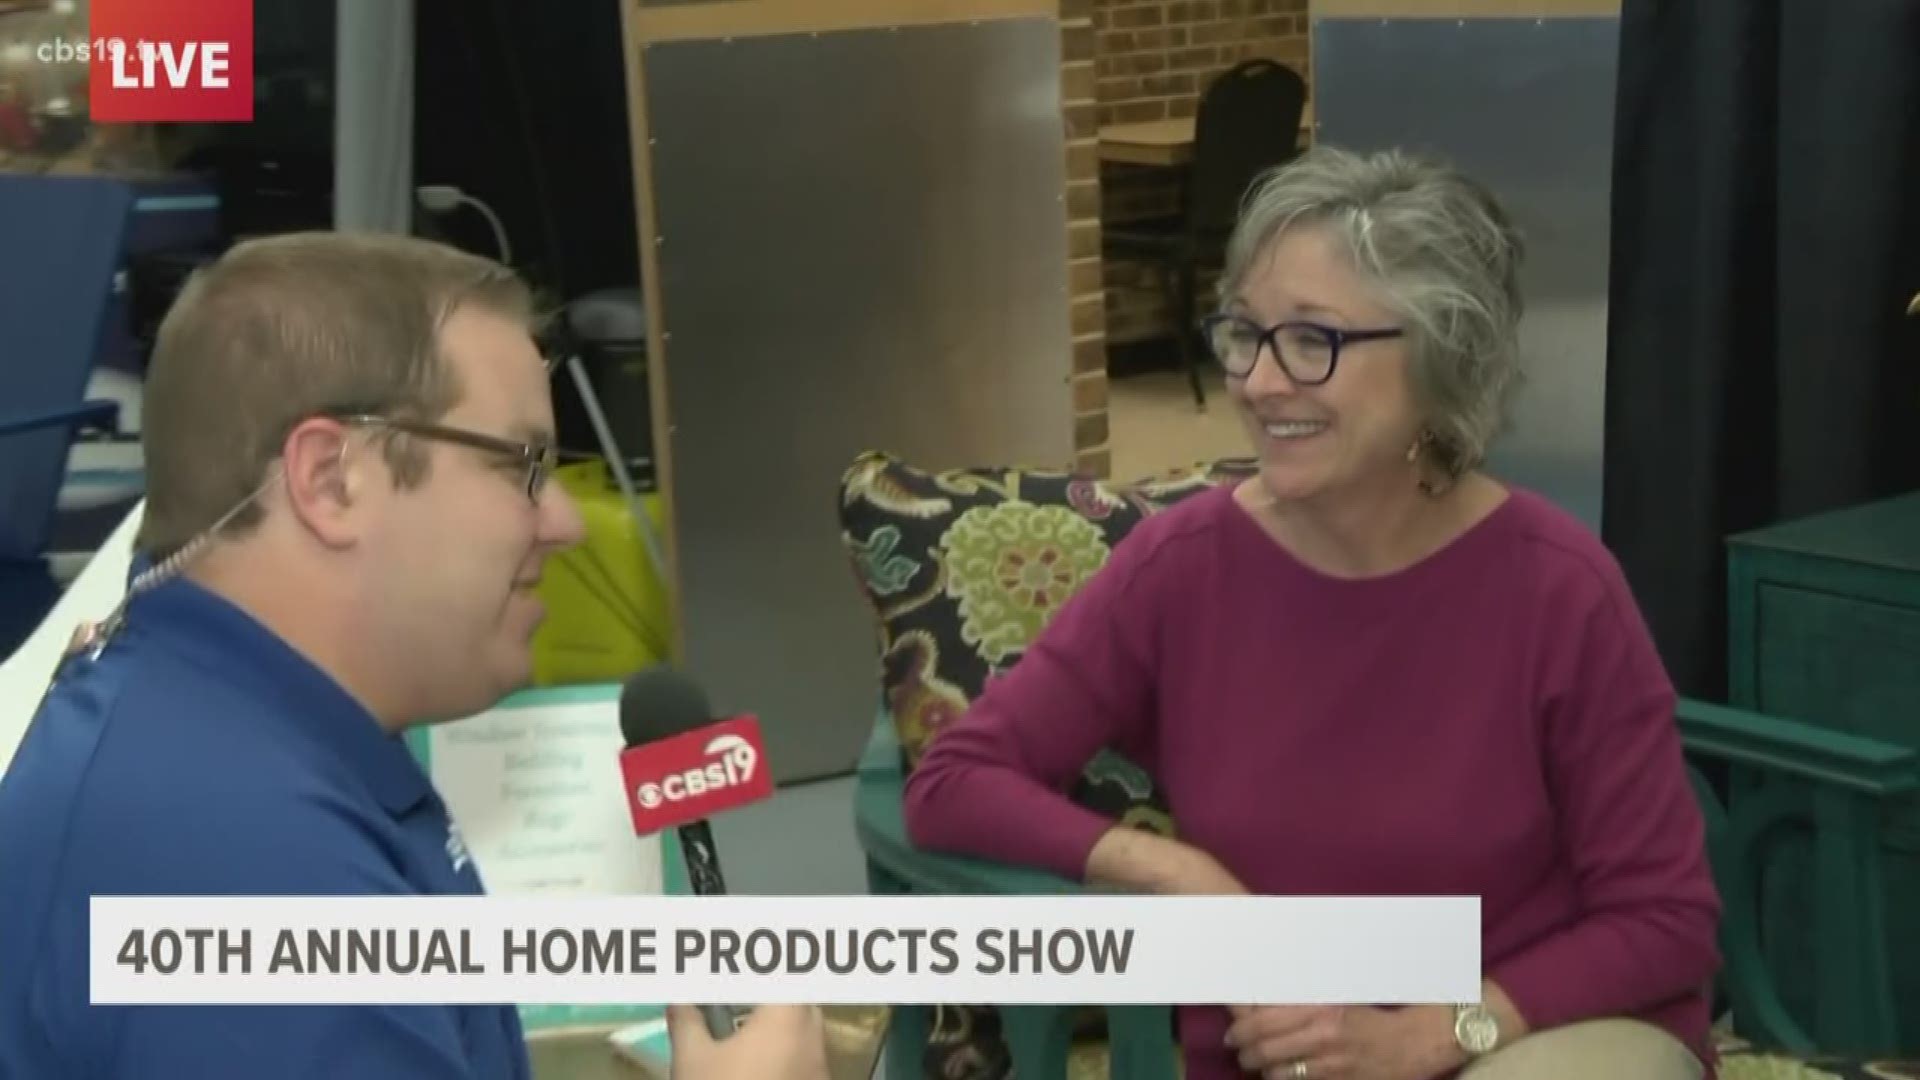 The 40th annual TABA Home Products Show kicks off tonight at Harvey Hall in Tyler. Meteorologist Michael Behrens talks with Libby Simmons about the show!